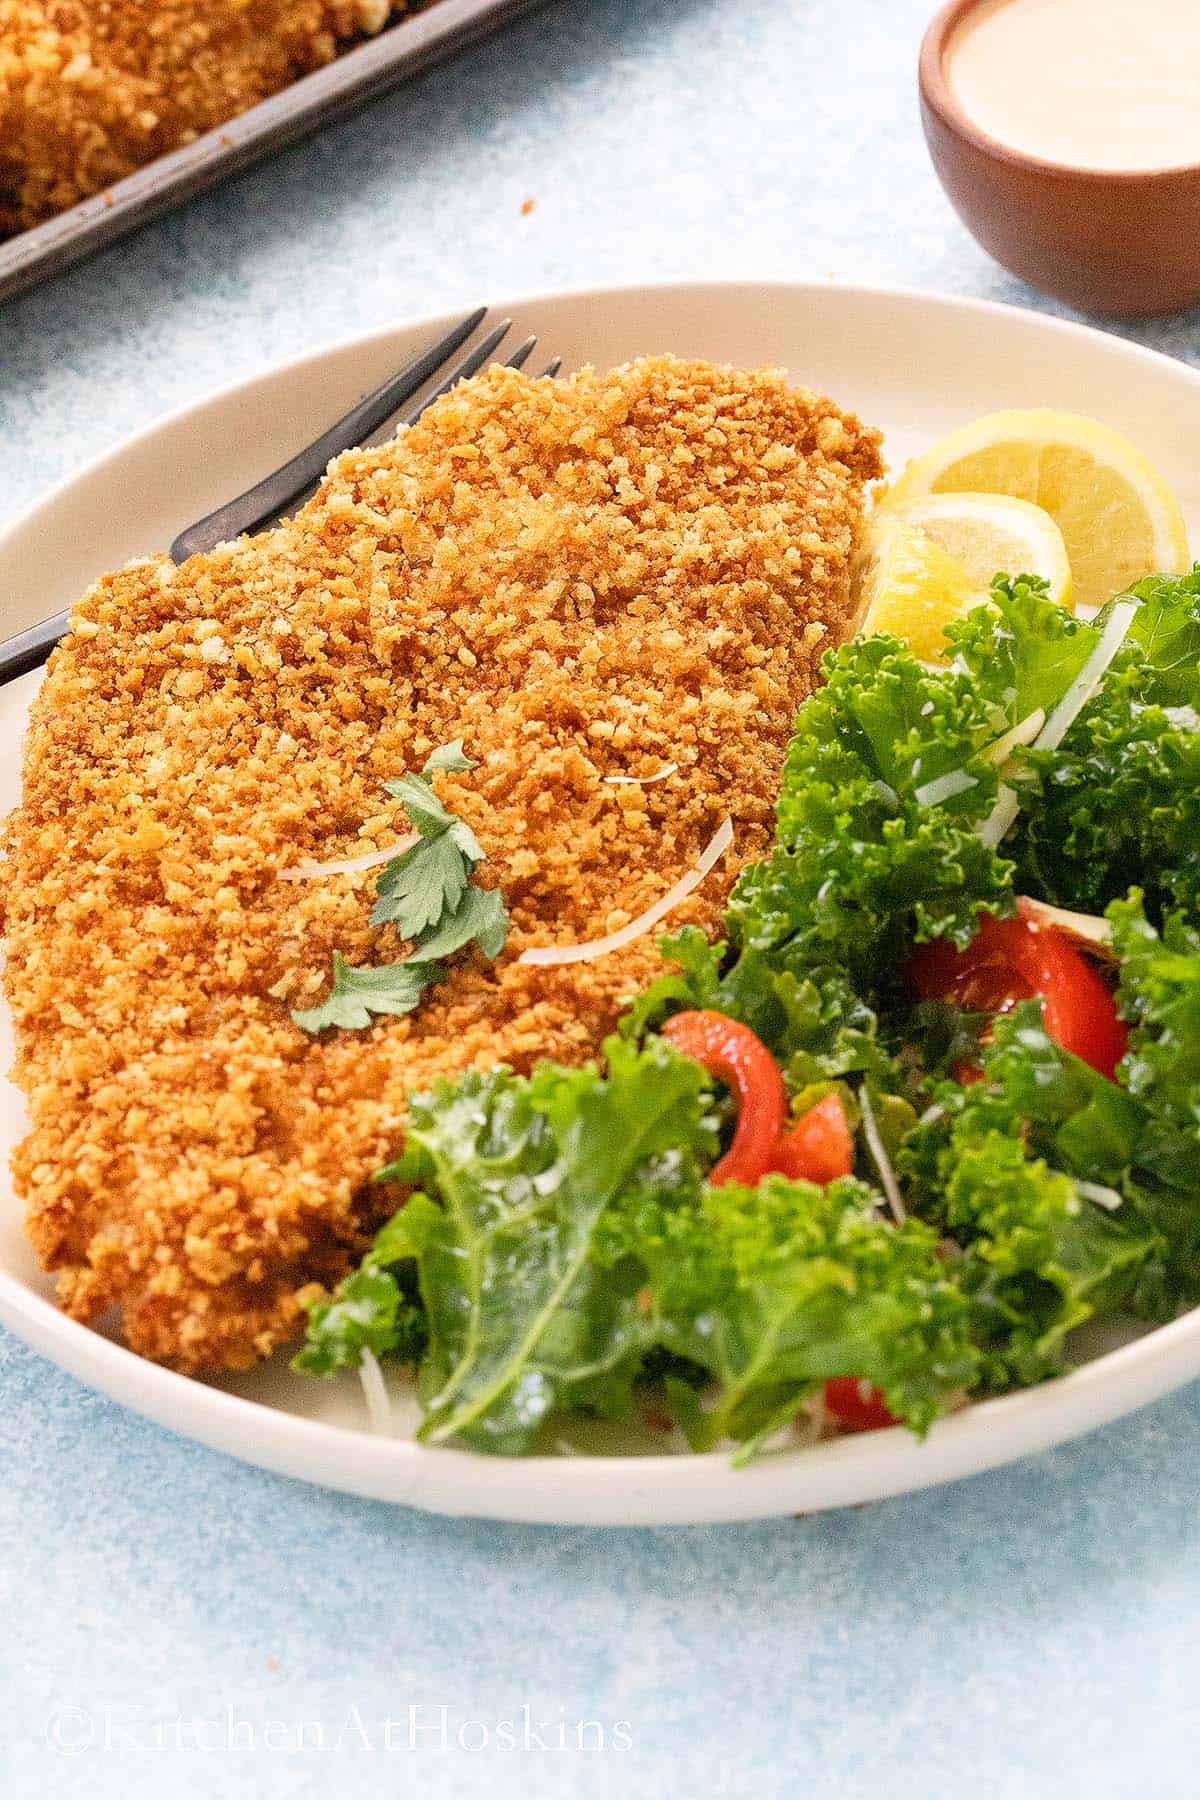 white plate with crispy chicken along with kale salad.